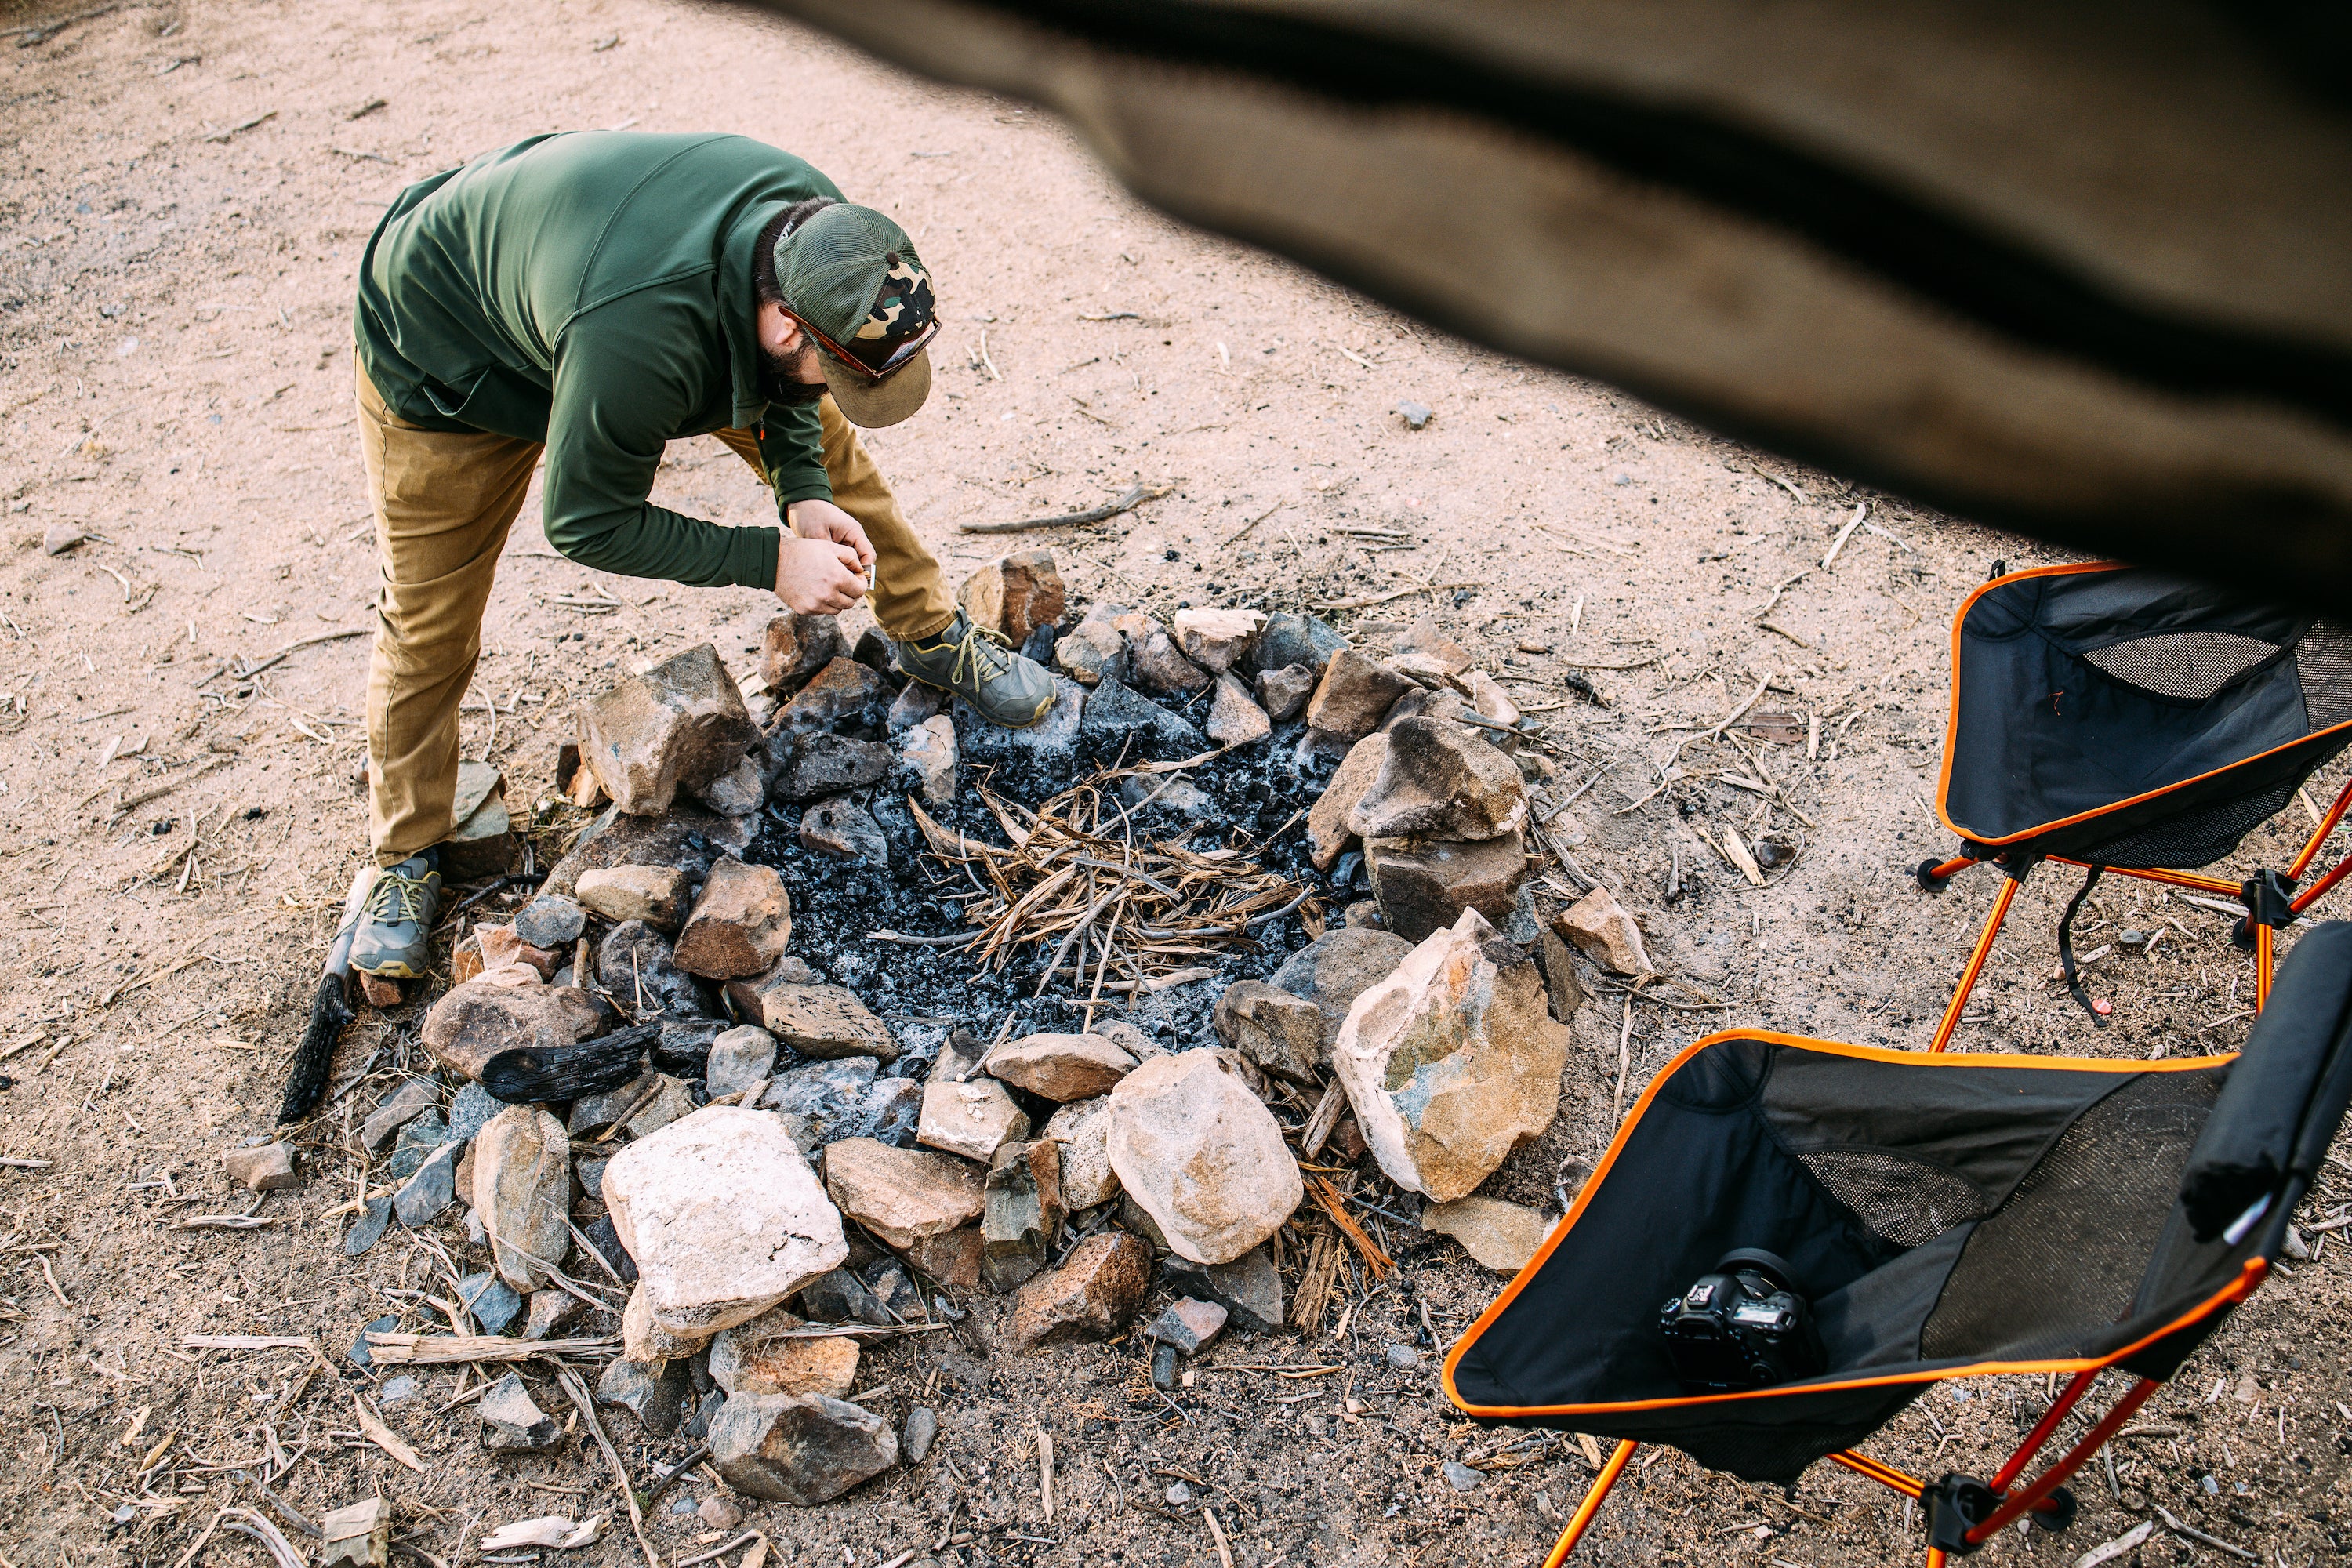 10 Tips for Winter Camping in the Desert - Desert Camping Fire Pit 